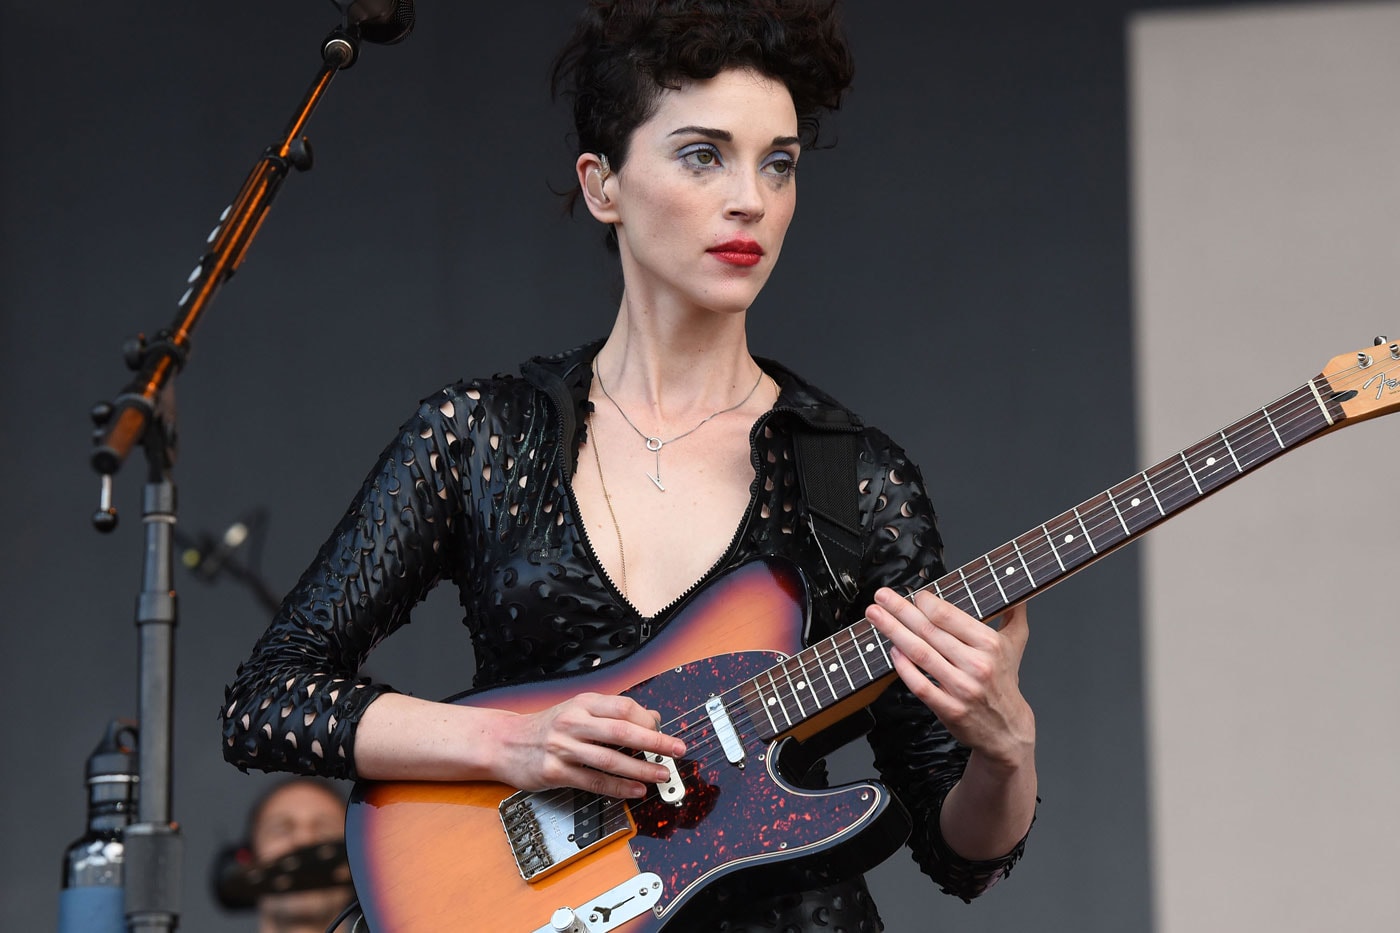 Watch St. Vincent Return Home in New Short Documentary